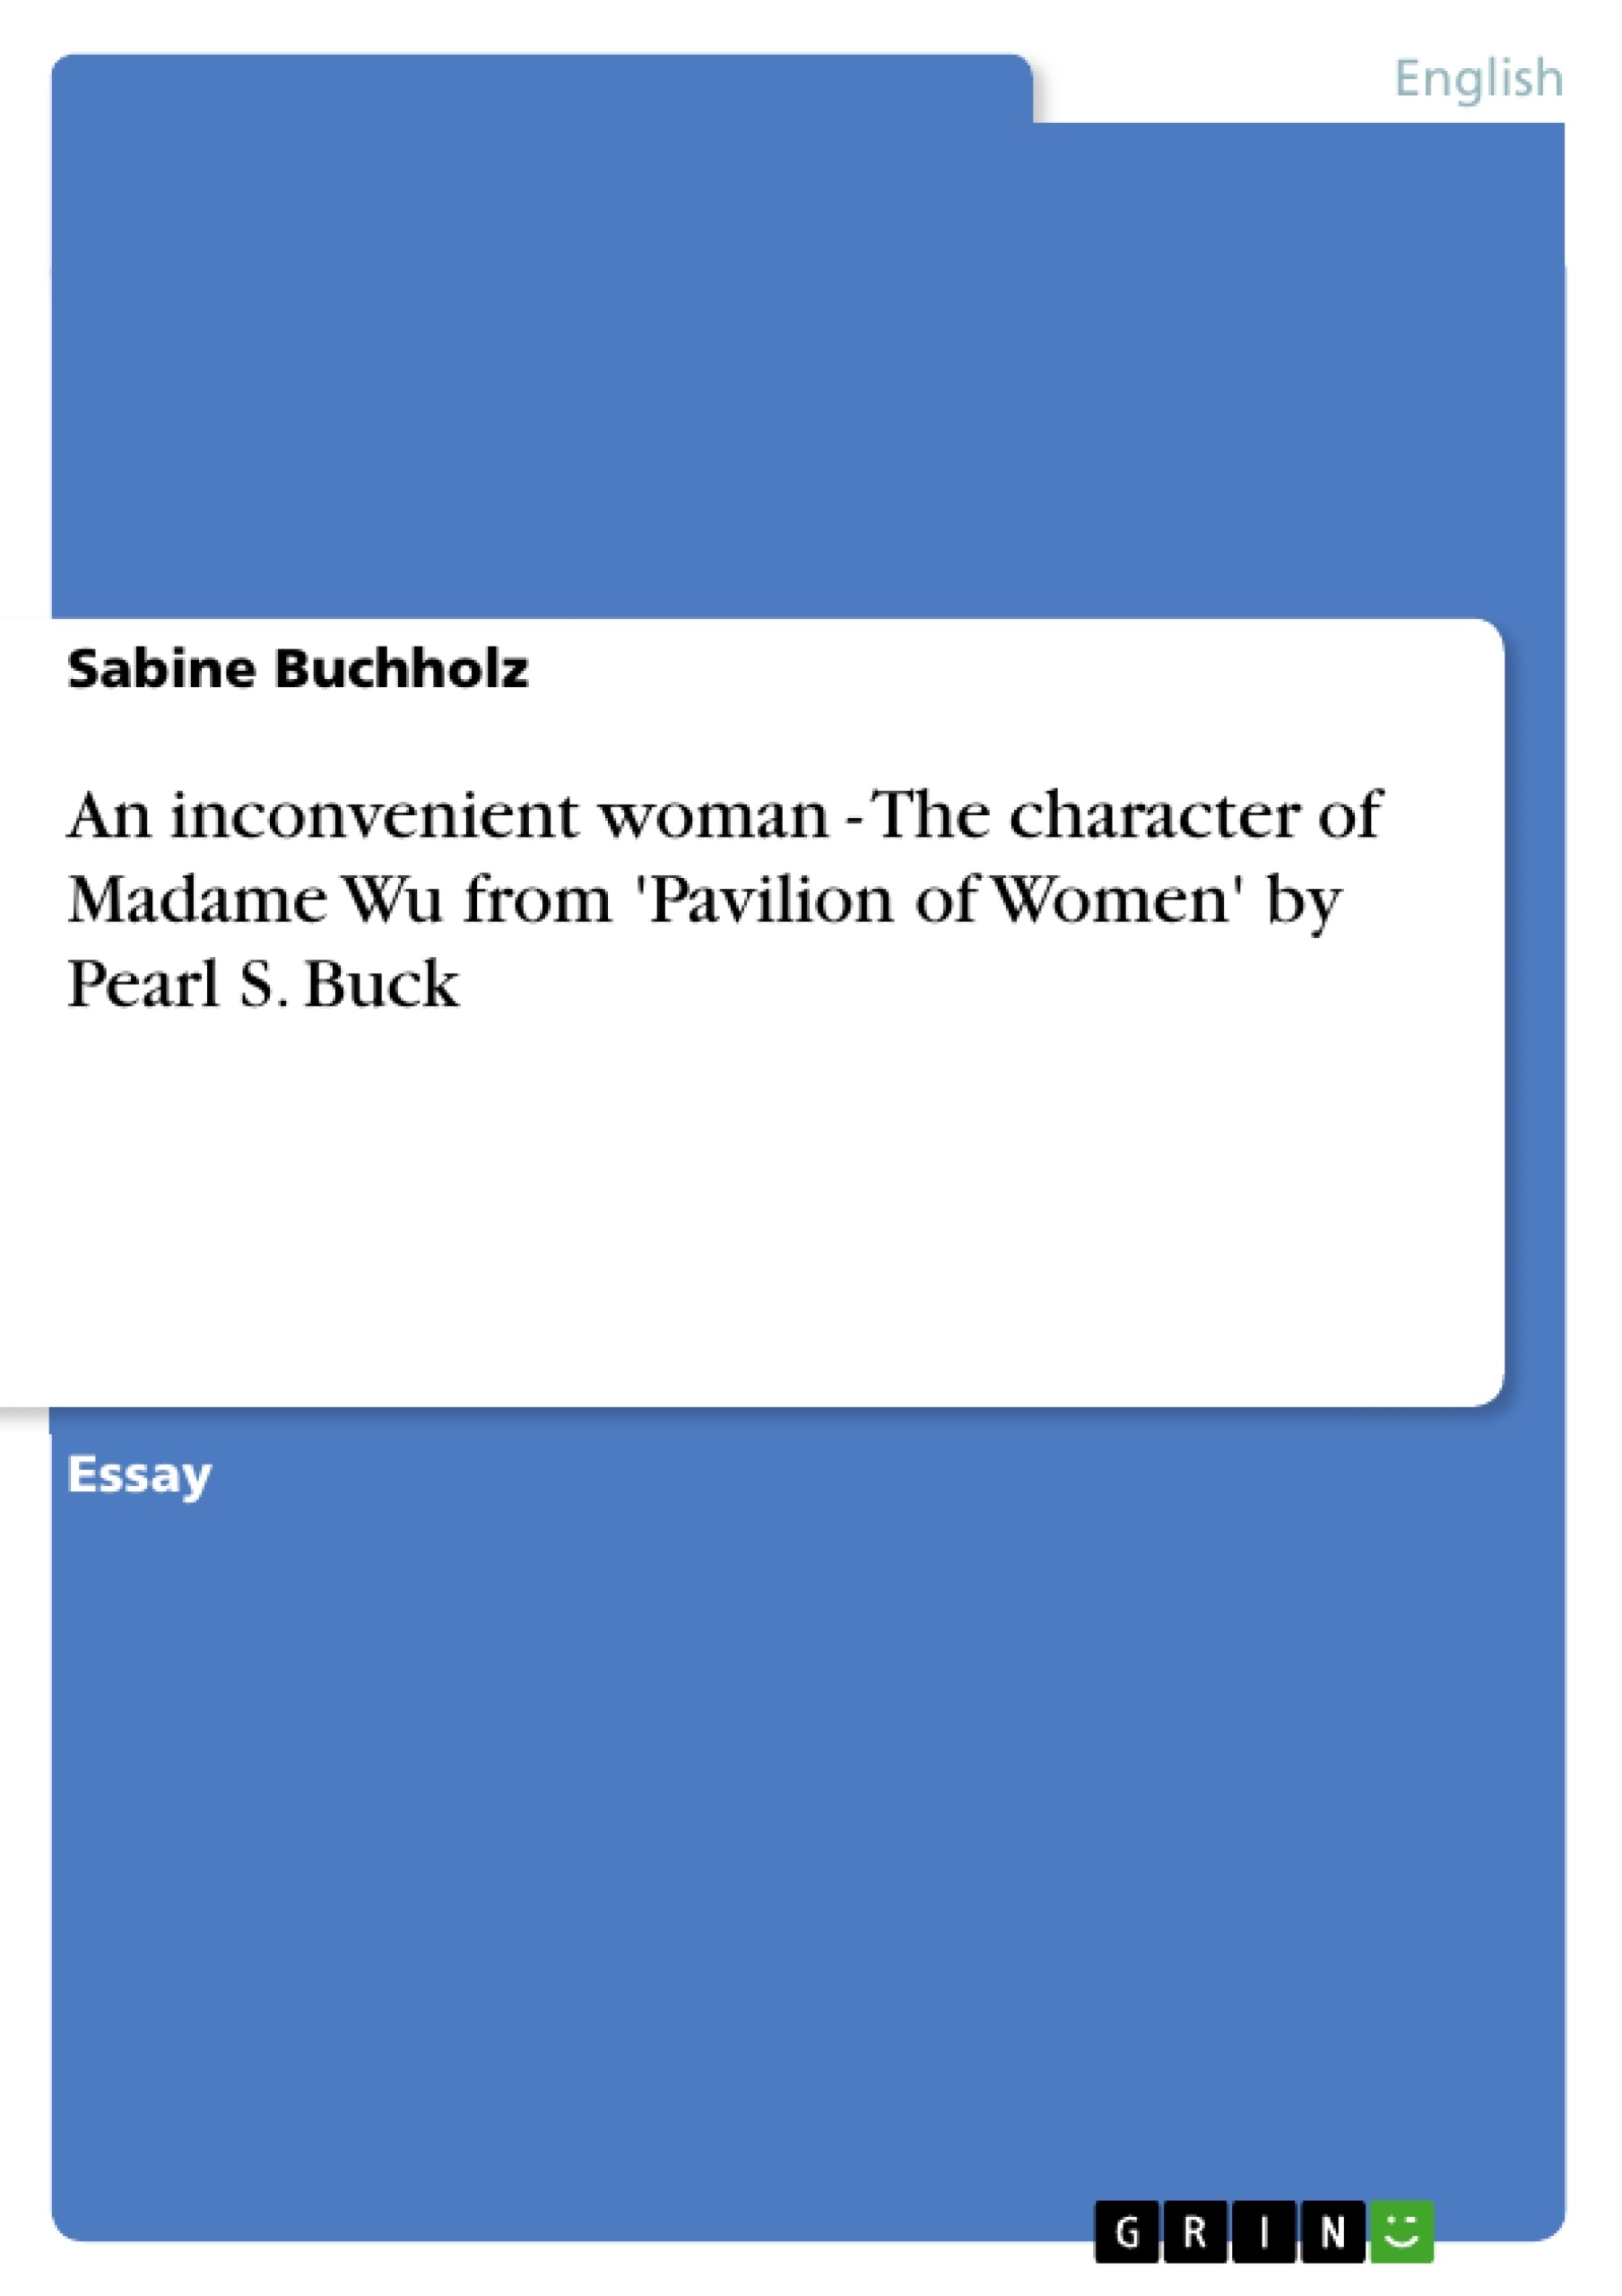 Titre: An inconvenient woman - The character of Madame Wu from 'Pavilion of Women' by Pearl S. Buck